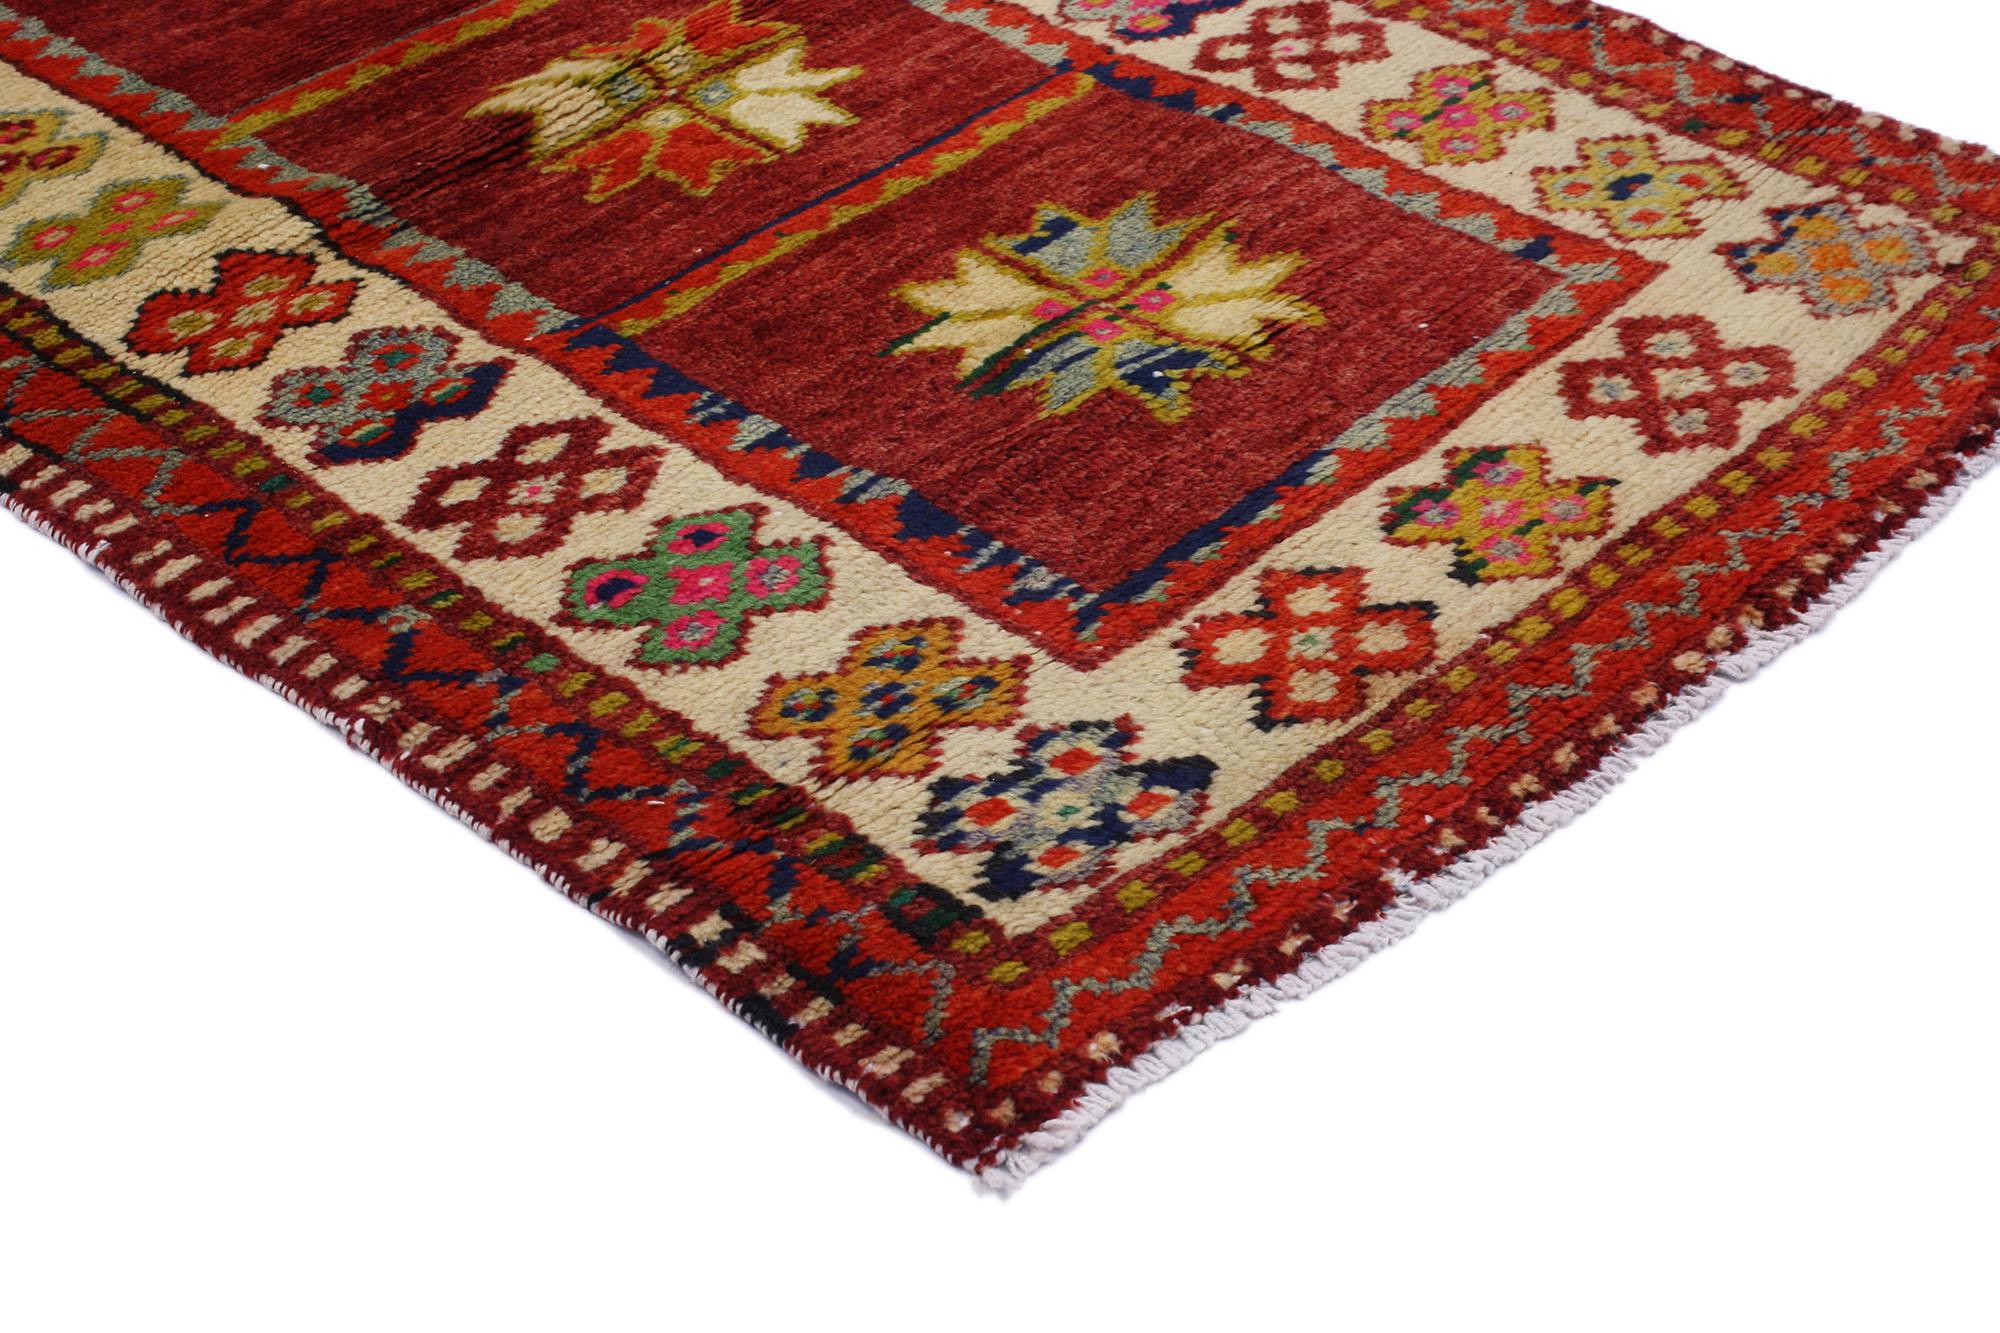 51765 Vintage Turkish Oushak Rug, 02'06 x 04'03.
Colorfully curated meets whimsical boho in this colorful Oushak rug. The eye-catching tribal design and lively colors woven into this piece work together creating a bold, exotic look. The composition